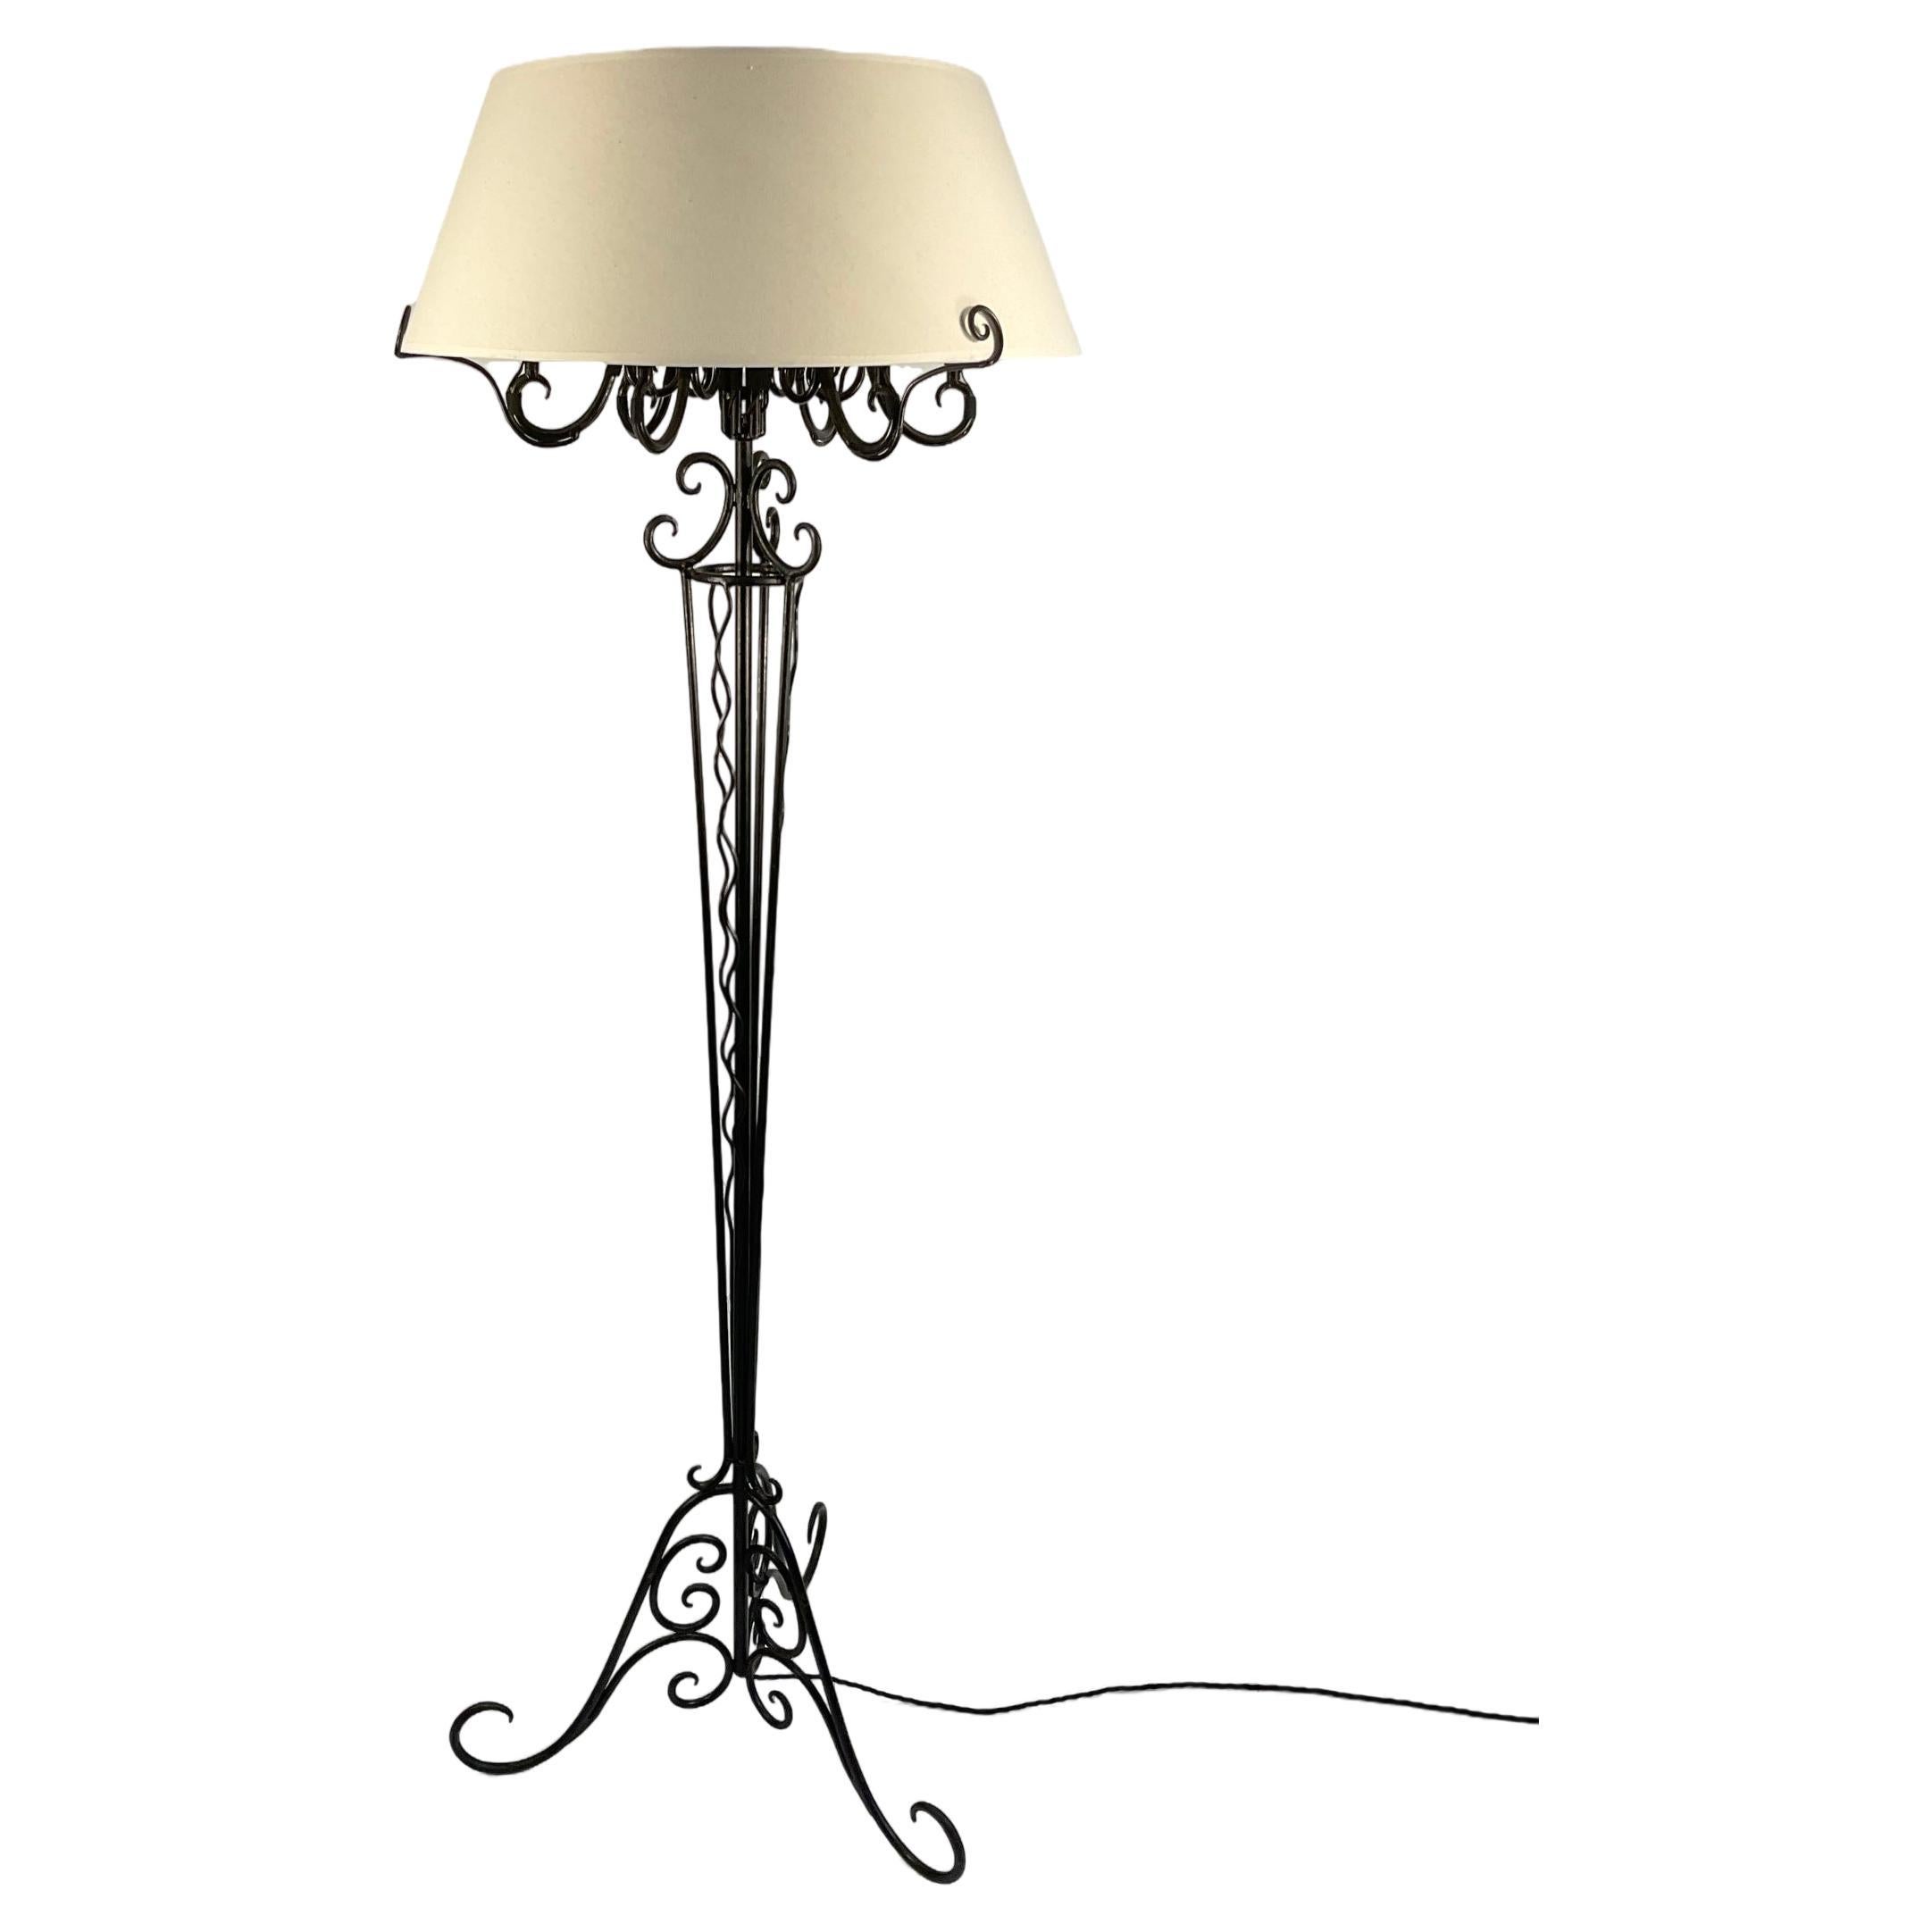 1920s Art Deco French Wrought Iron Floor Lamp in the Style of René Prou